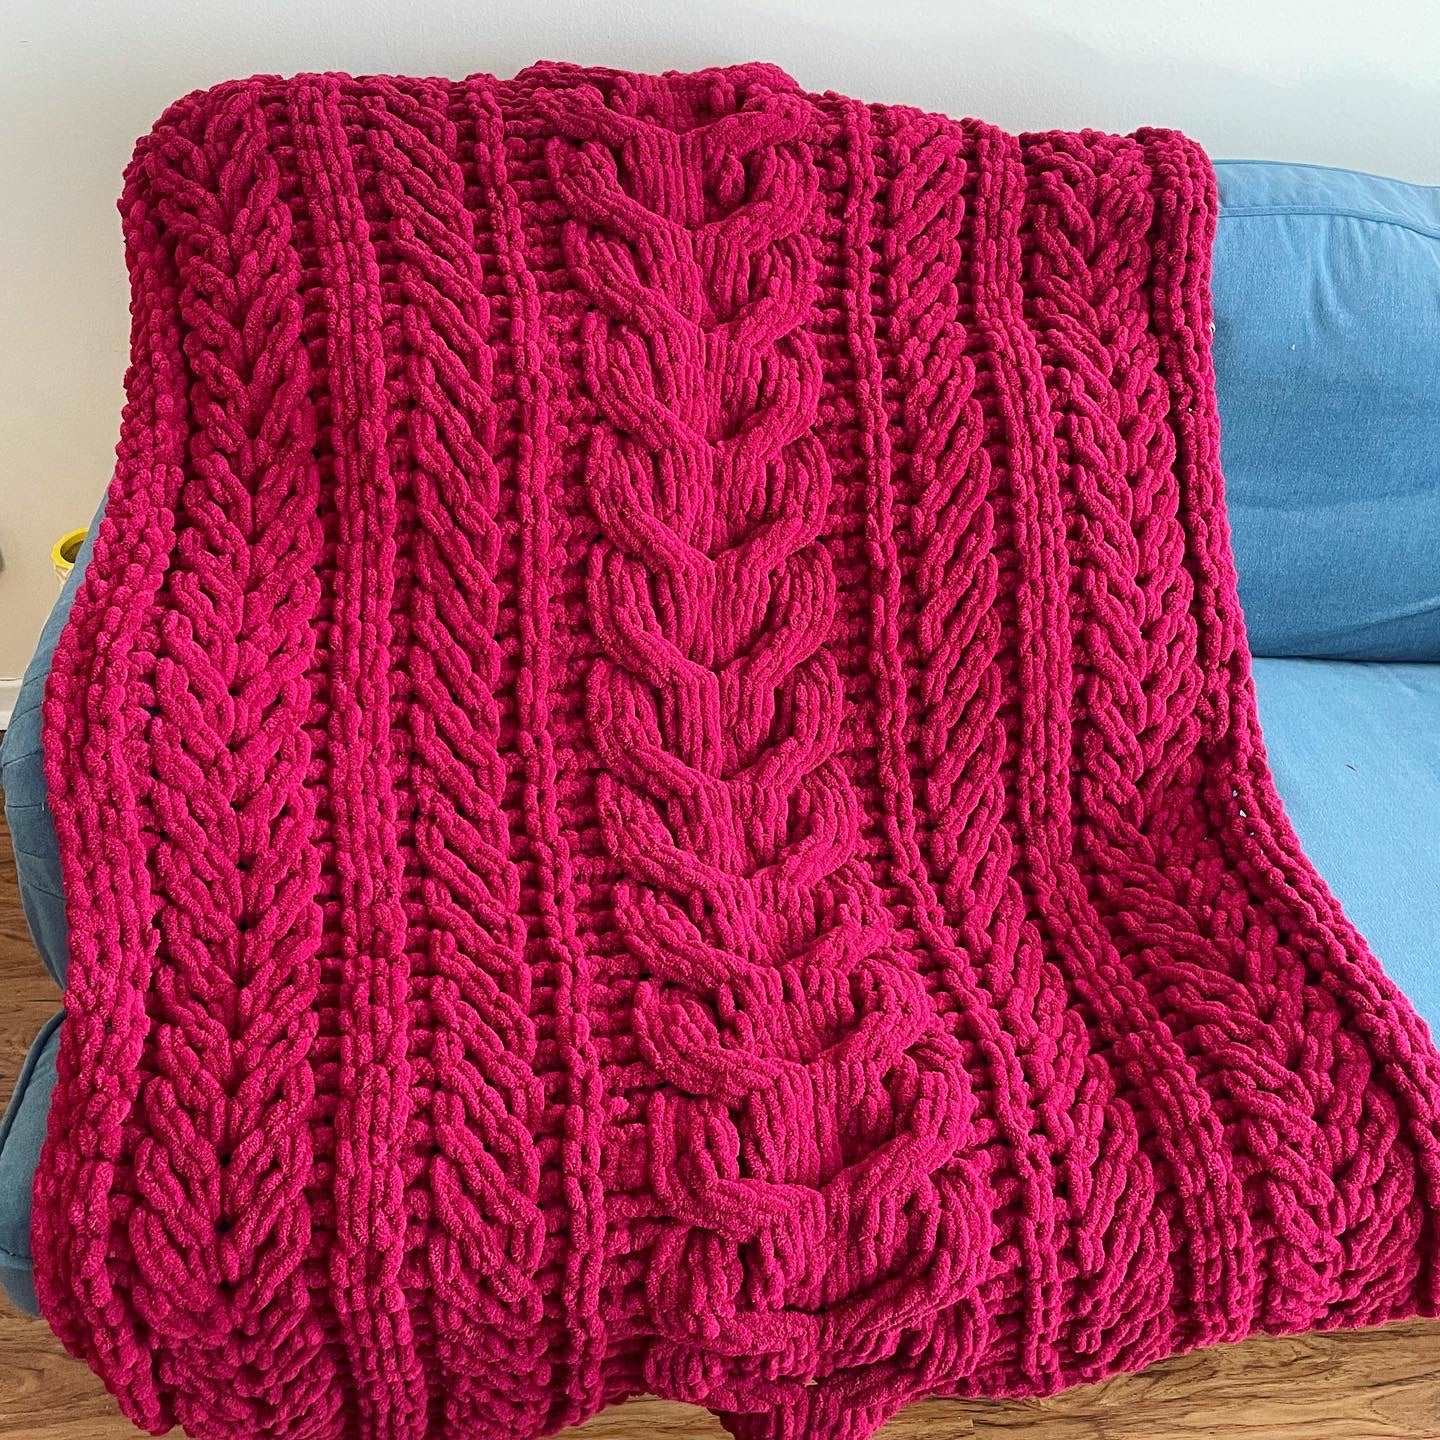 Extra-Chunky Staghorn Cable Blanket - ILoveMyBlanket